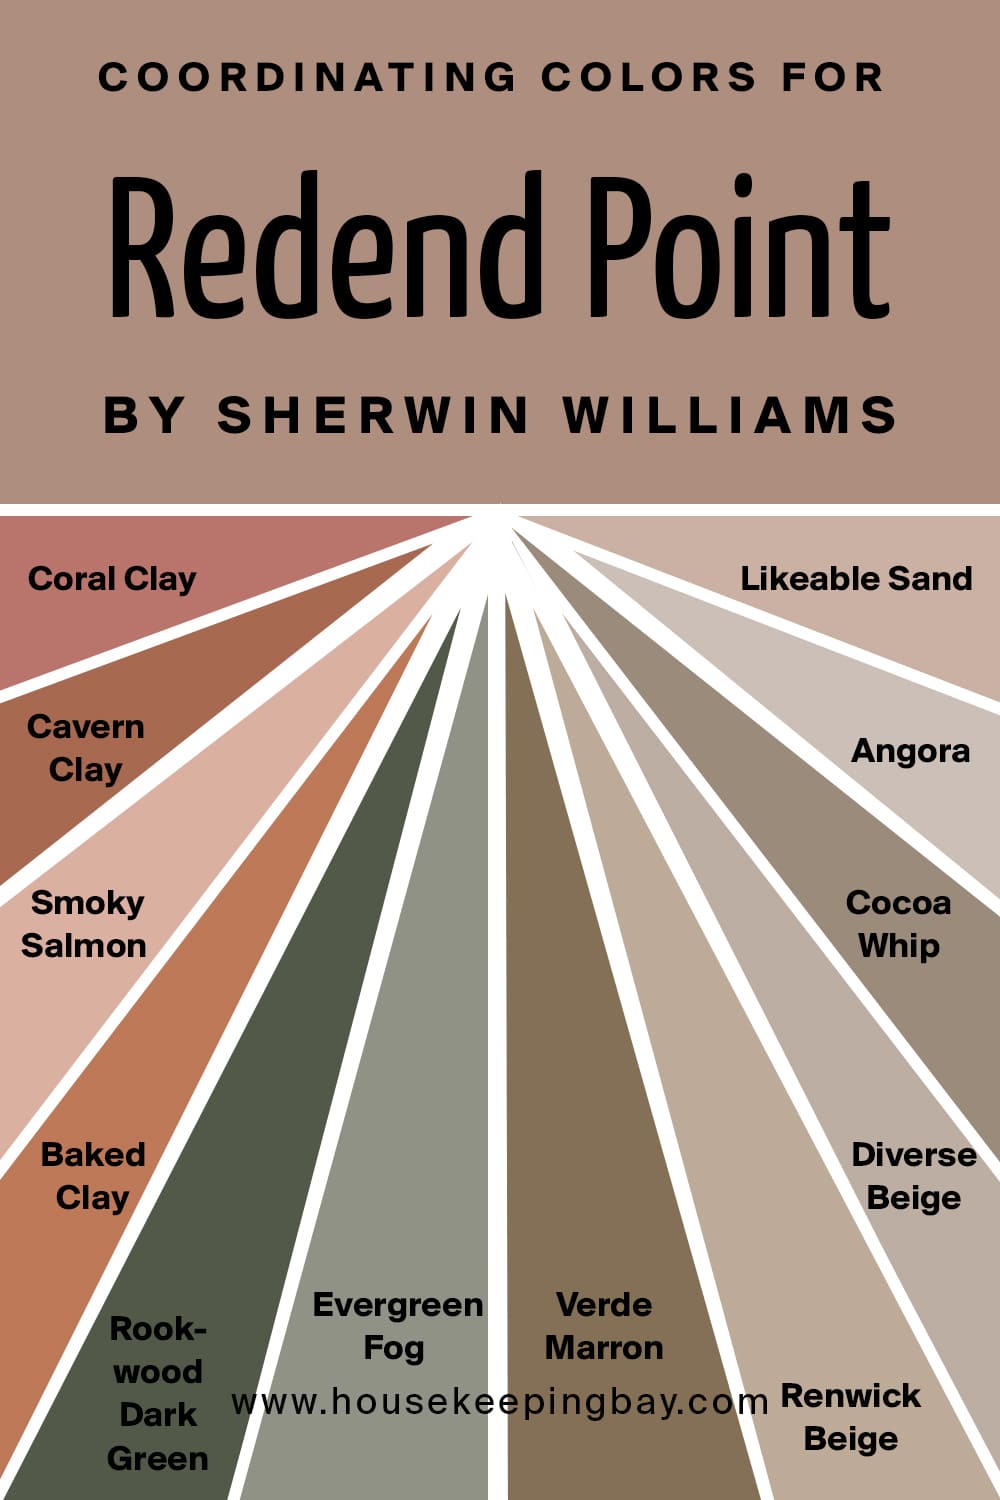 Coordinating Colors for Redend Point by Sherwin Williams